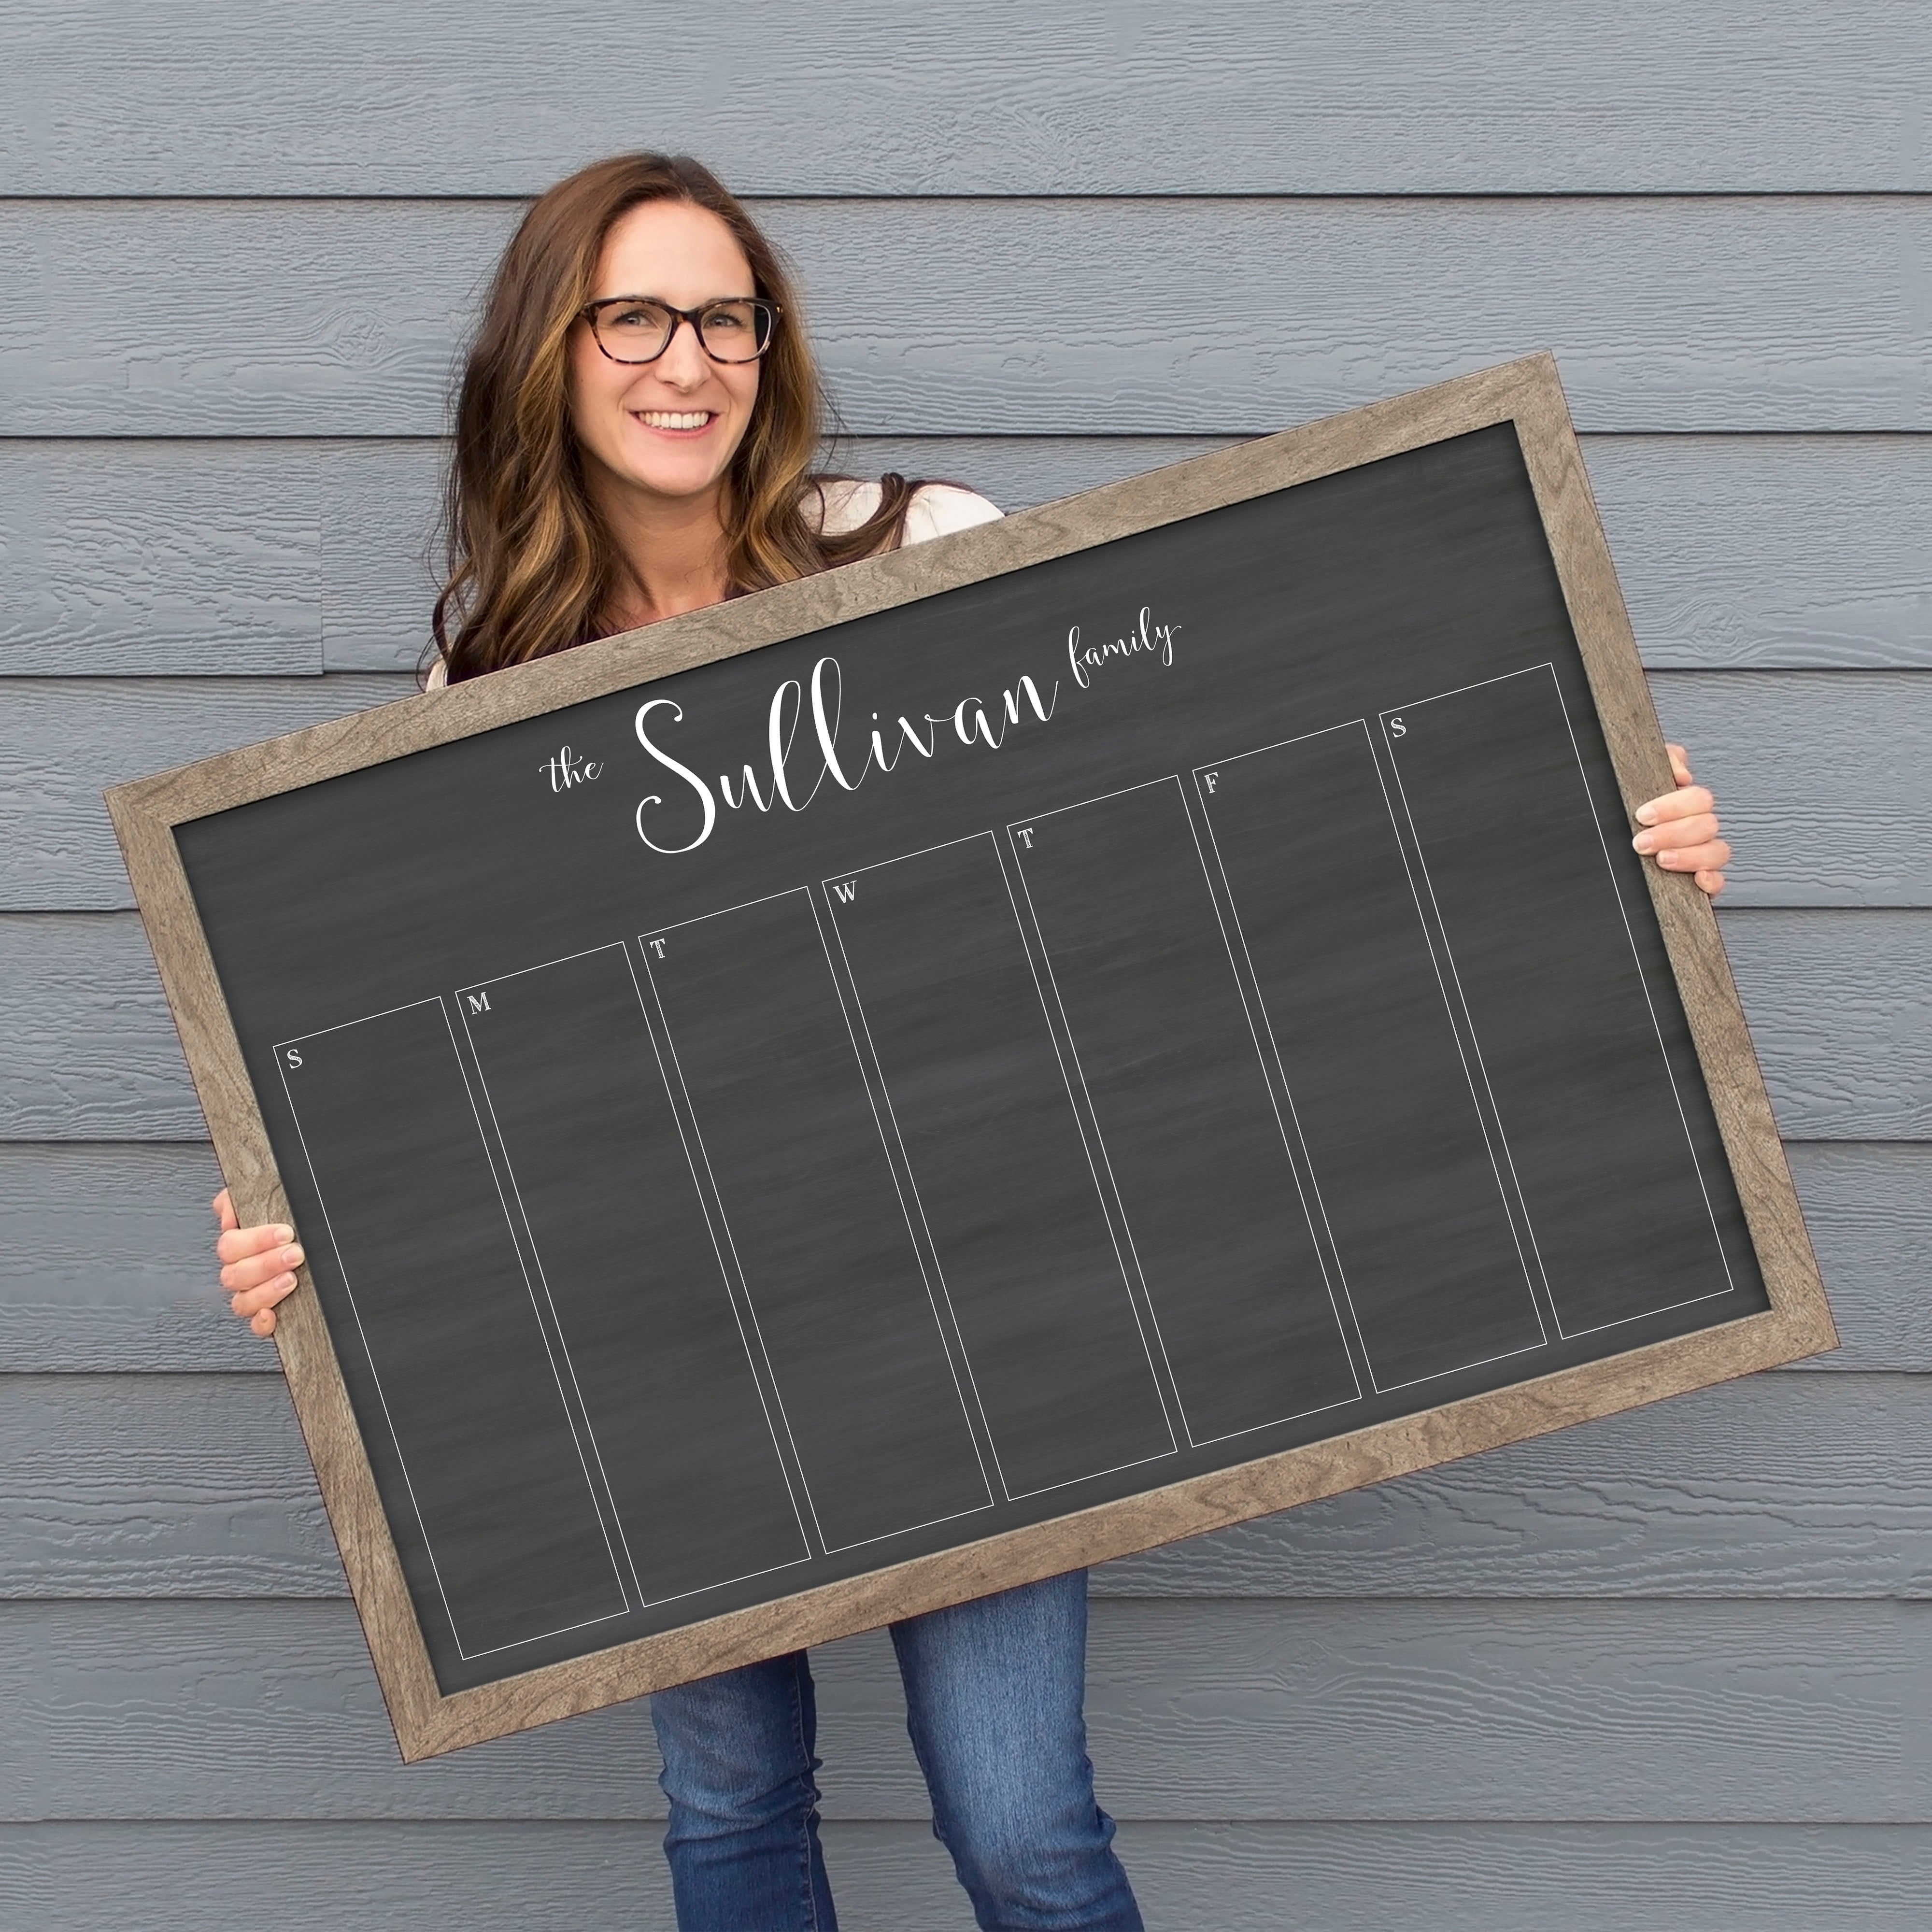 A framed dry-erase weekly calender with a chalkboard look hanging on the wall